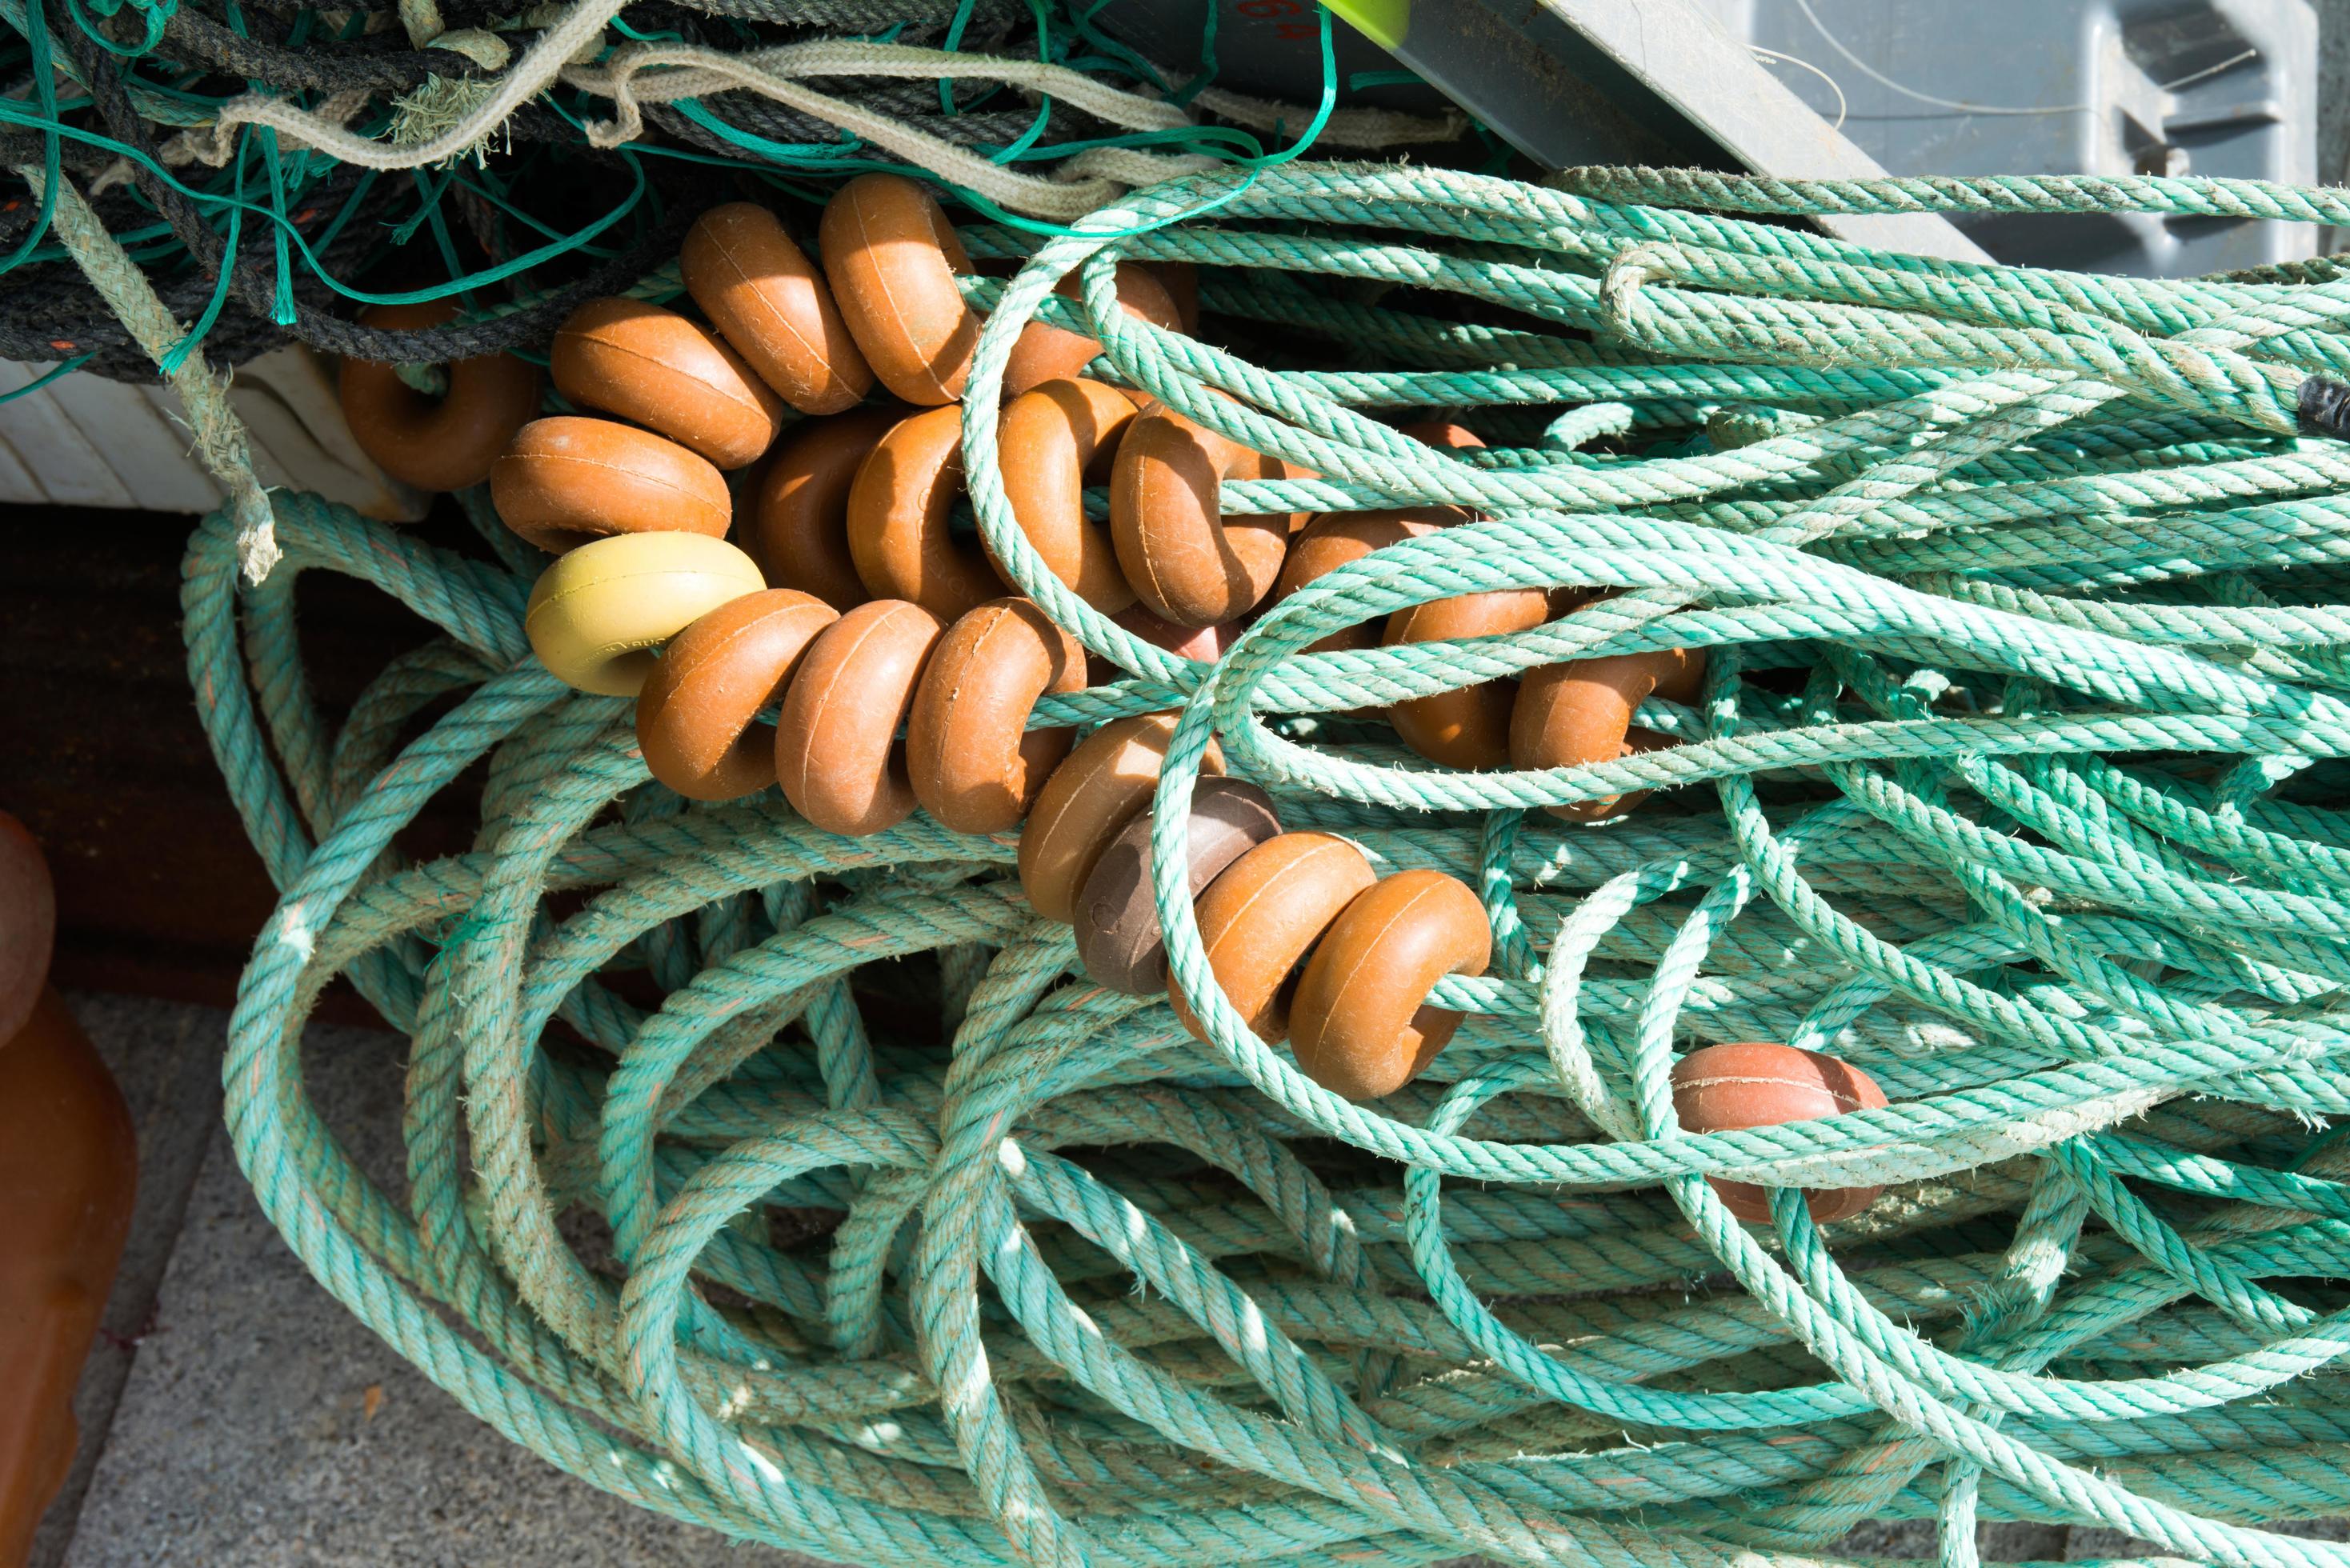 Used fishing net with pvc floats out of water for repair. Background  8530868 Stock Photo at Vecteezy